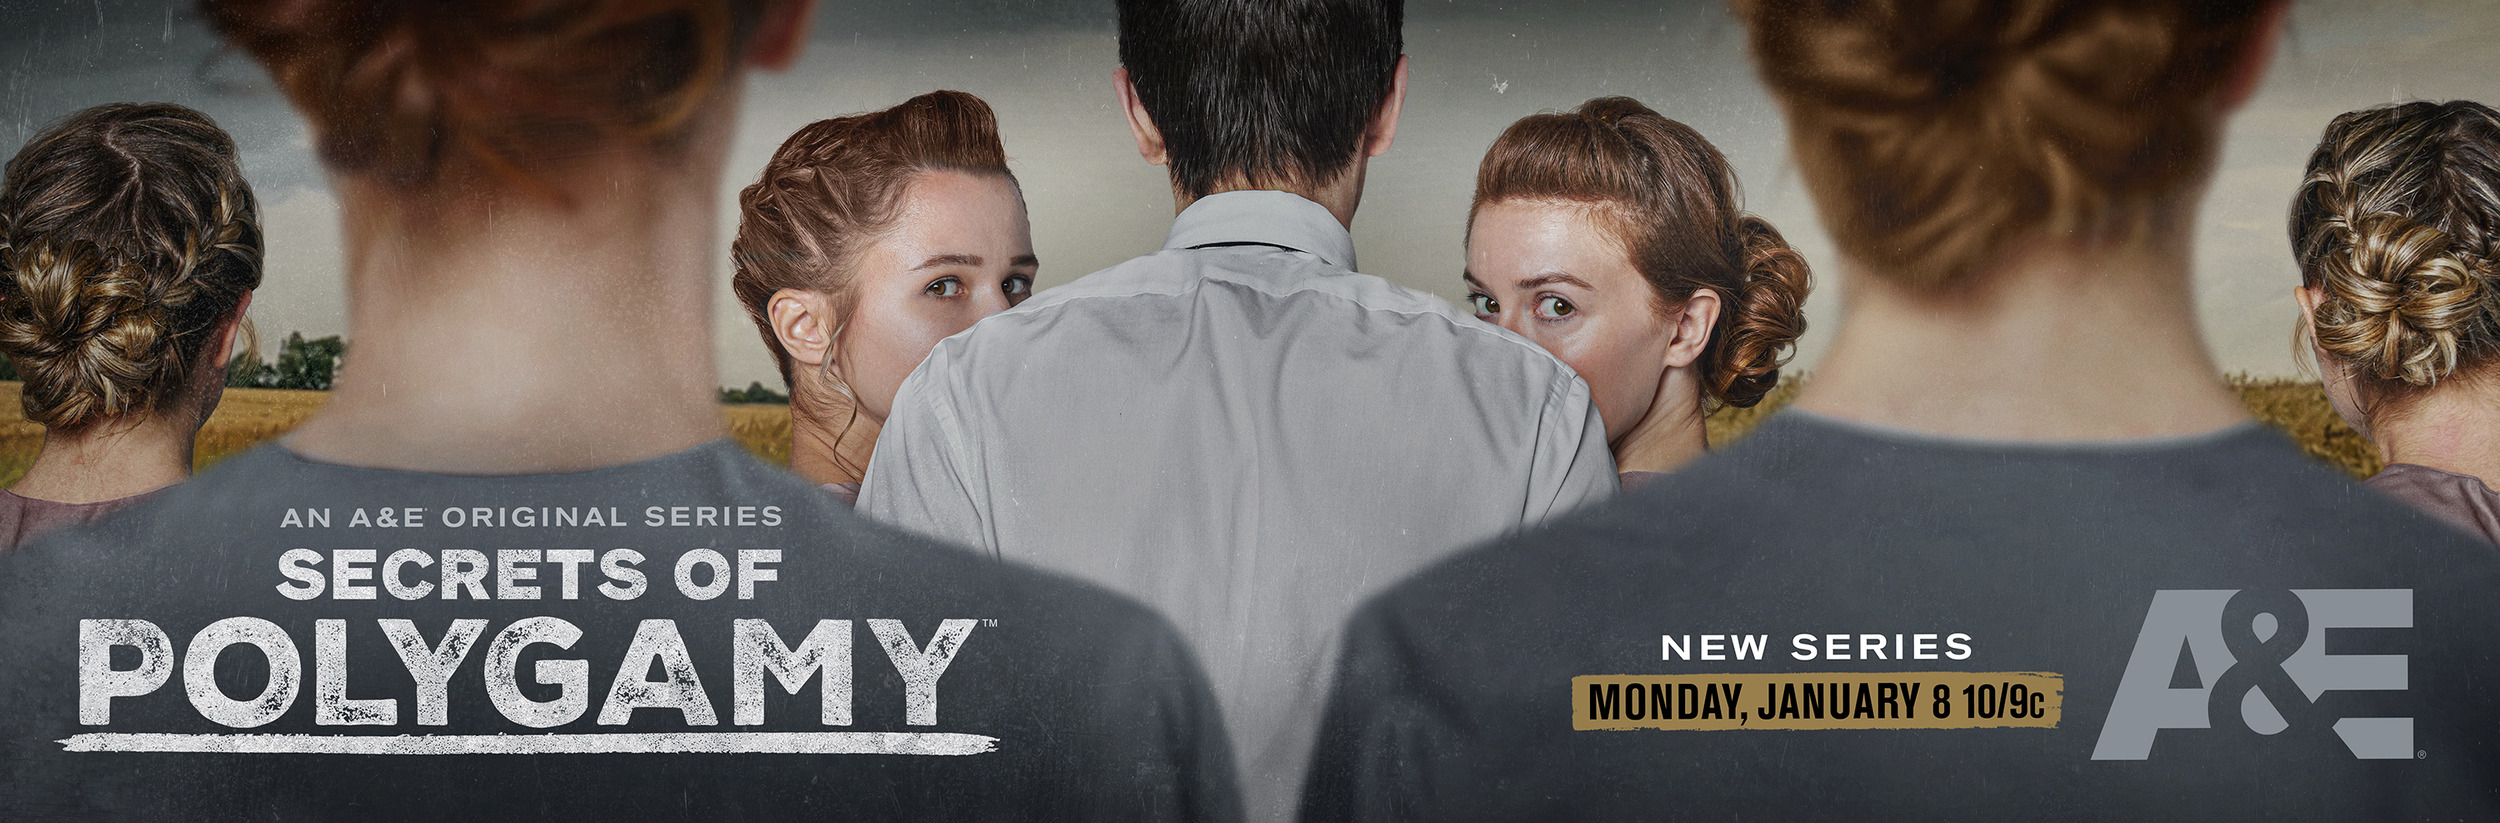 Mega Sized TV Poster Image for Secrets of Polygamy (#2 of 2)